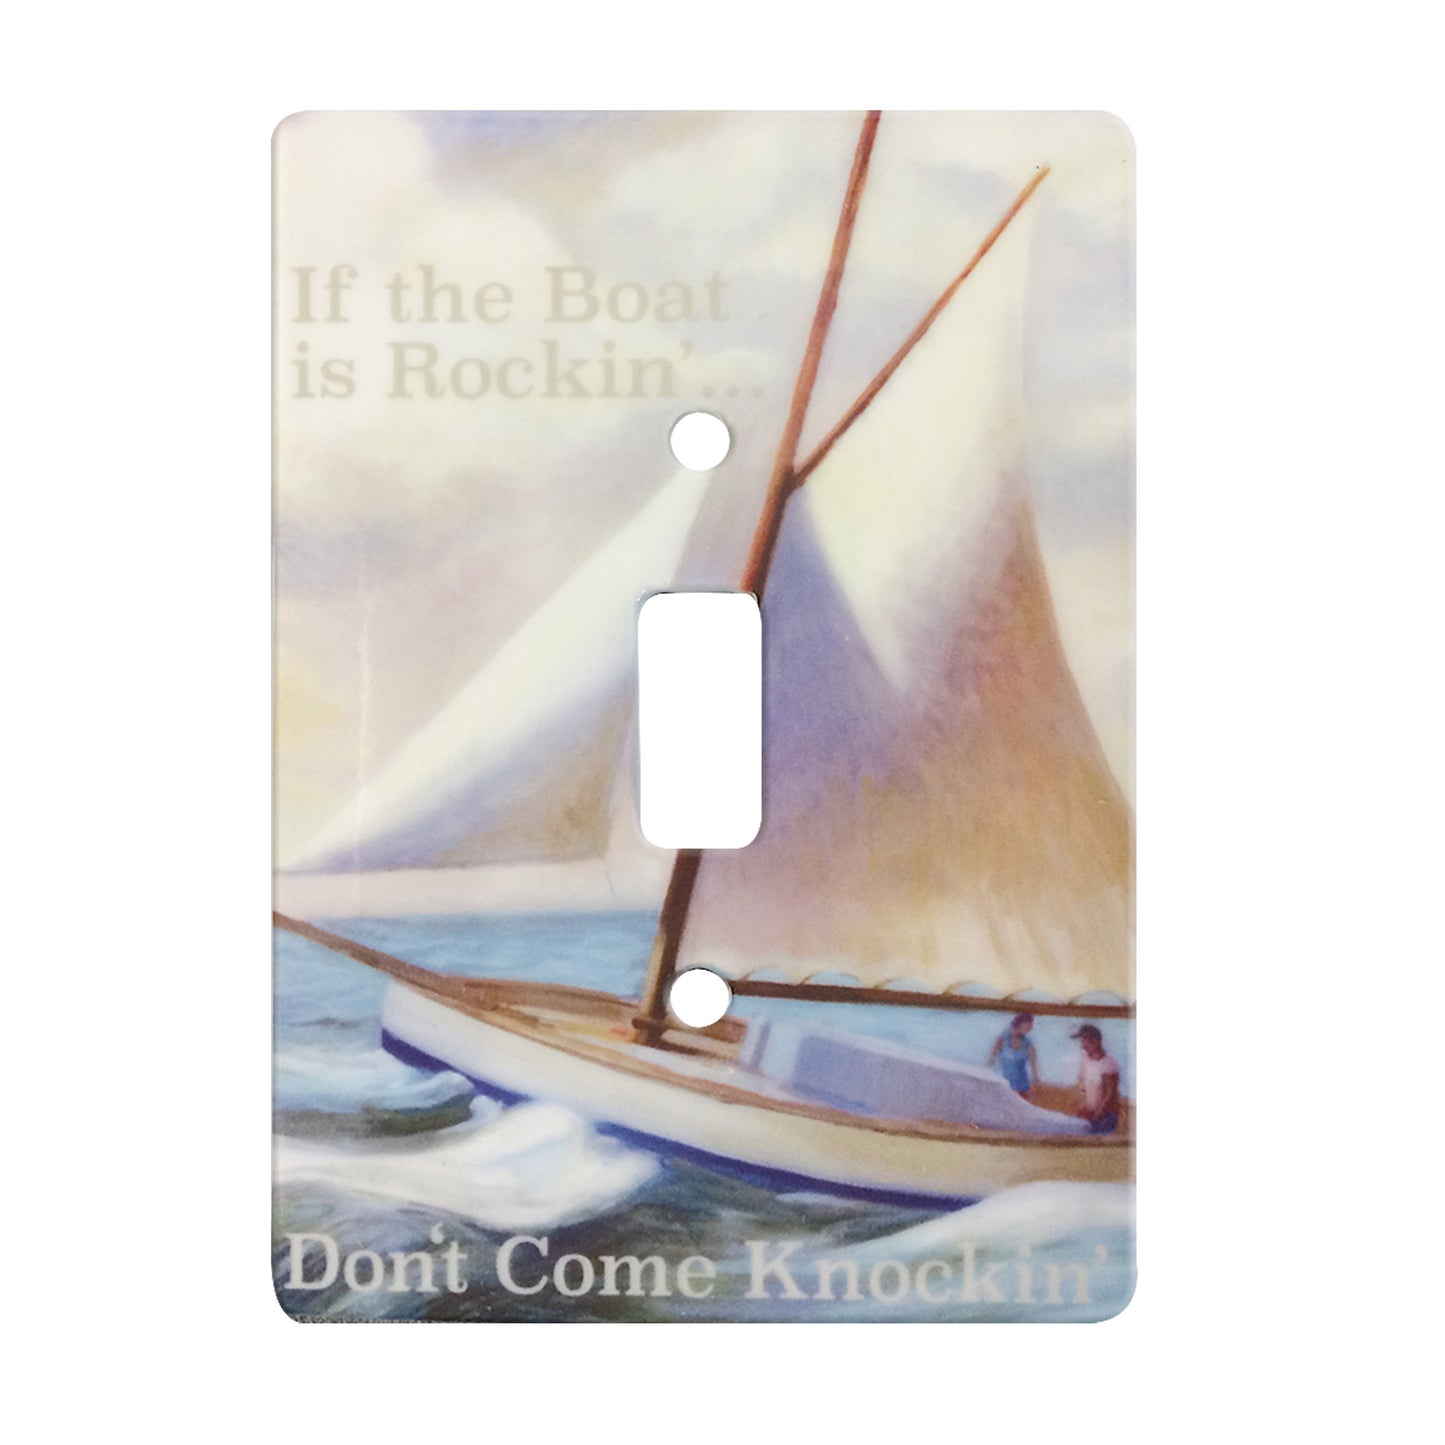 ceramic single toggle switch plate featuring illustrative piece of sail boat on water with two people on board. Also features text stating "If the boat is rockin'. Don't come knockin'."